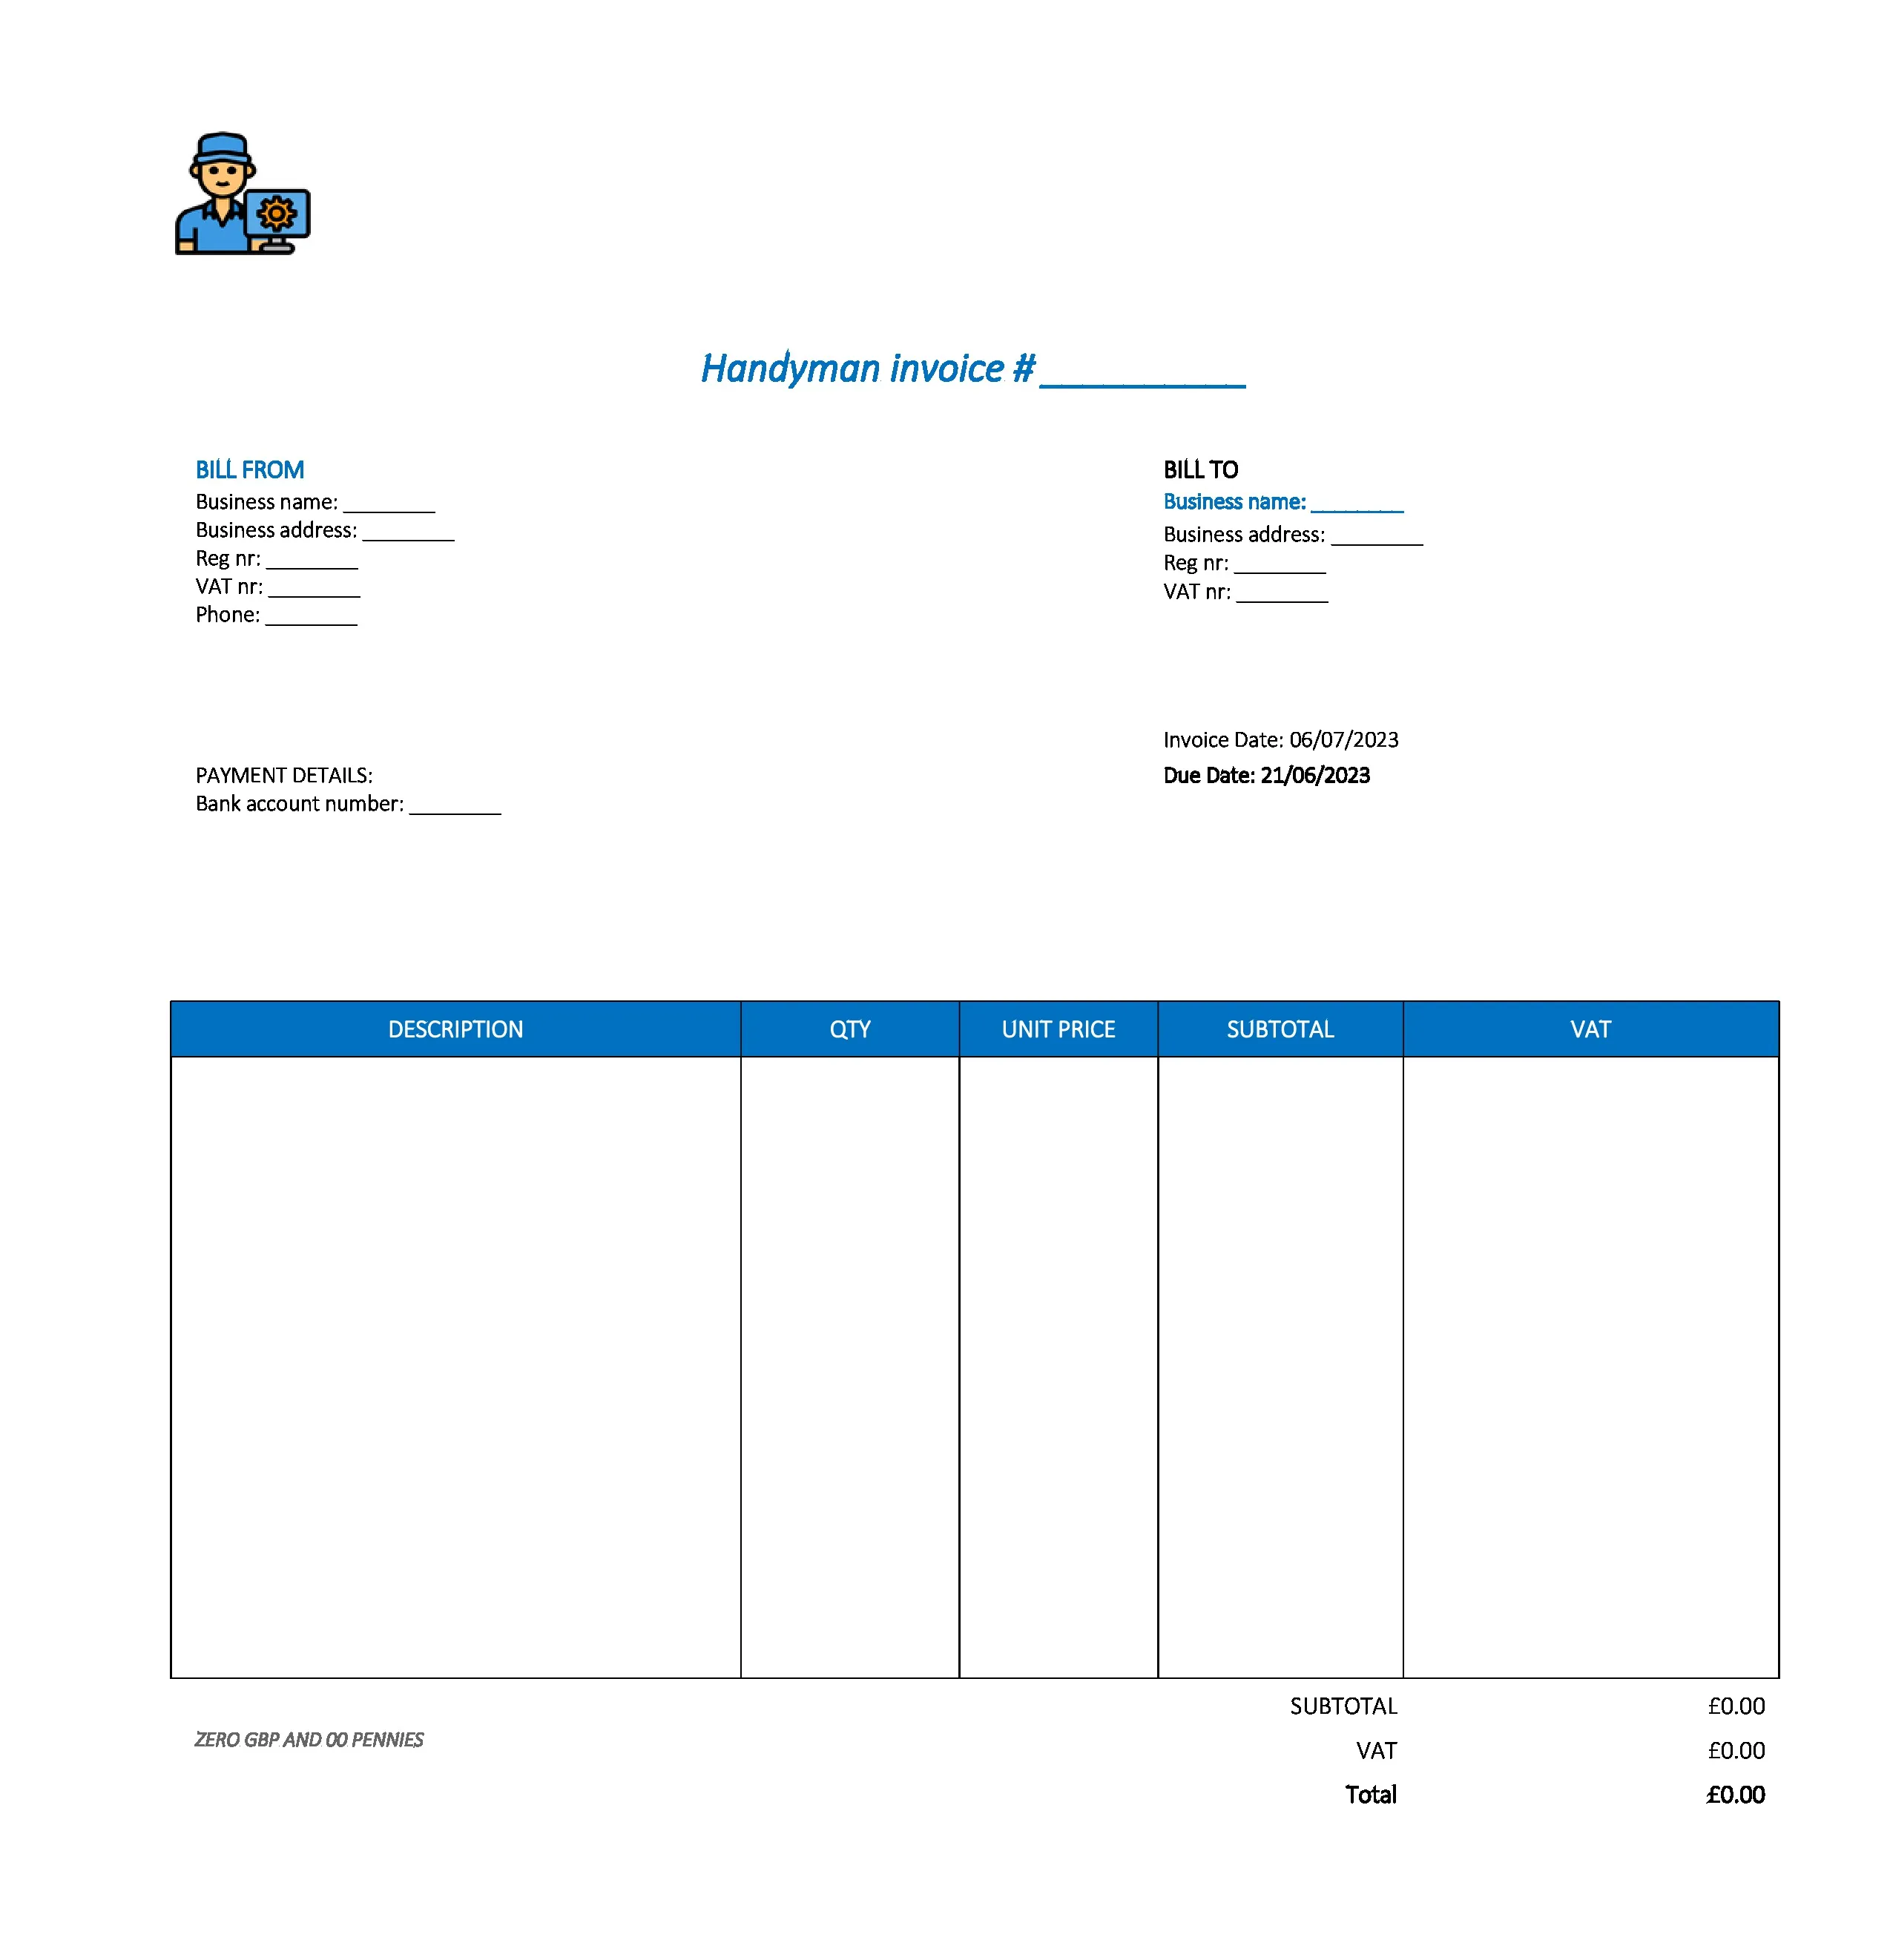 typical handyman invoice template UK Excel / Google sheets